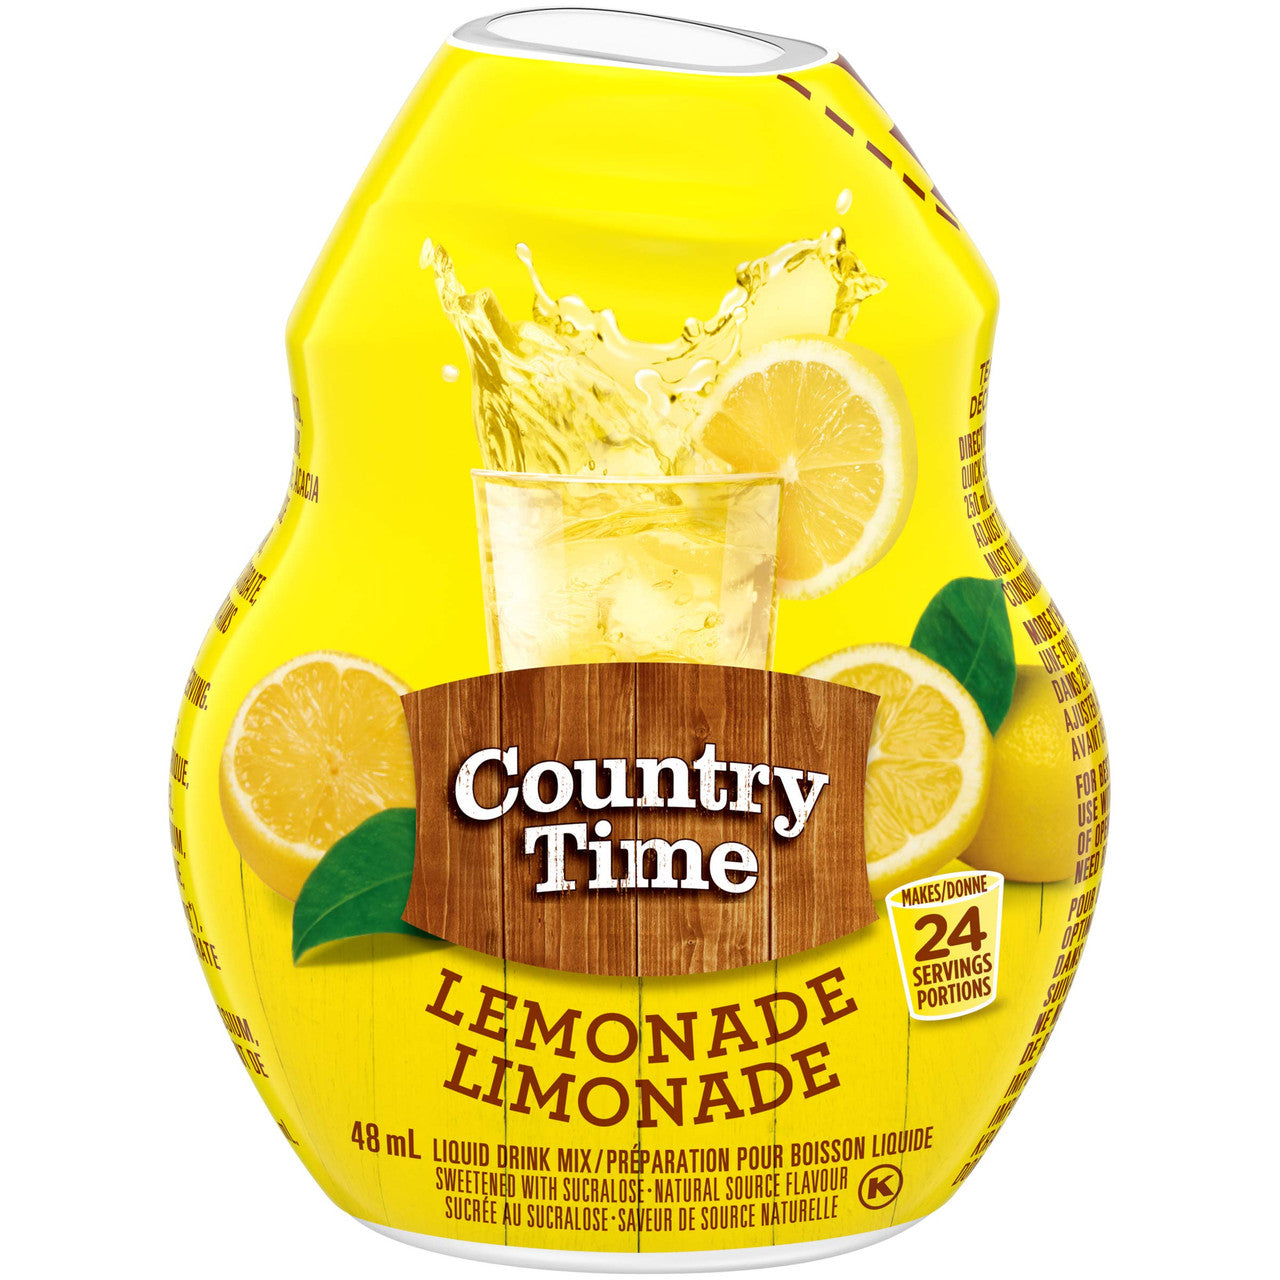 COUNTRY TIME Liquid Drink Mix - Lemonade 48ml (Imported from Canada)